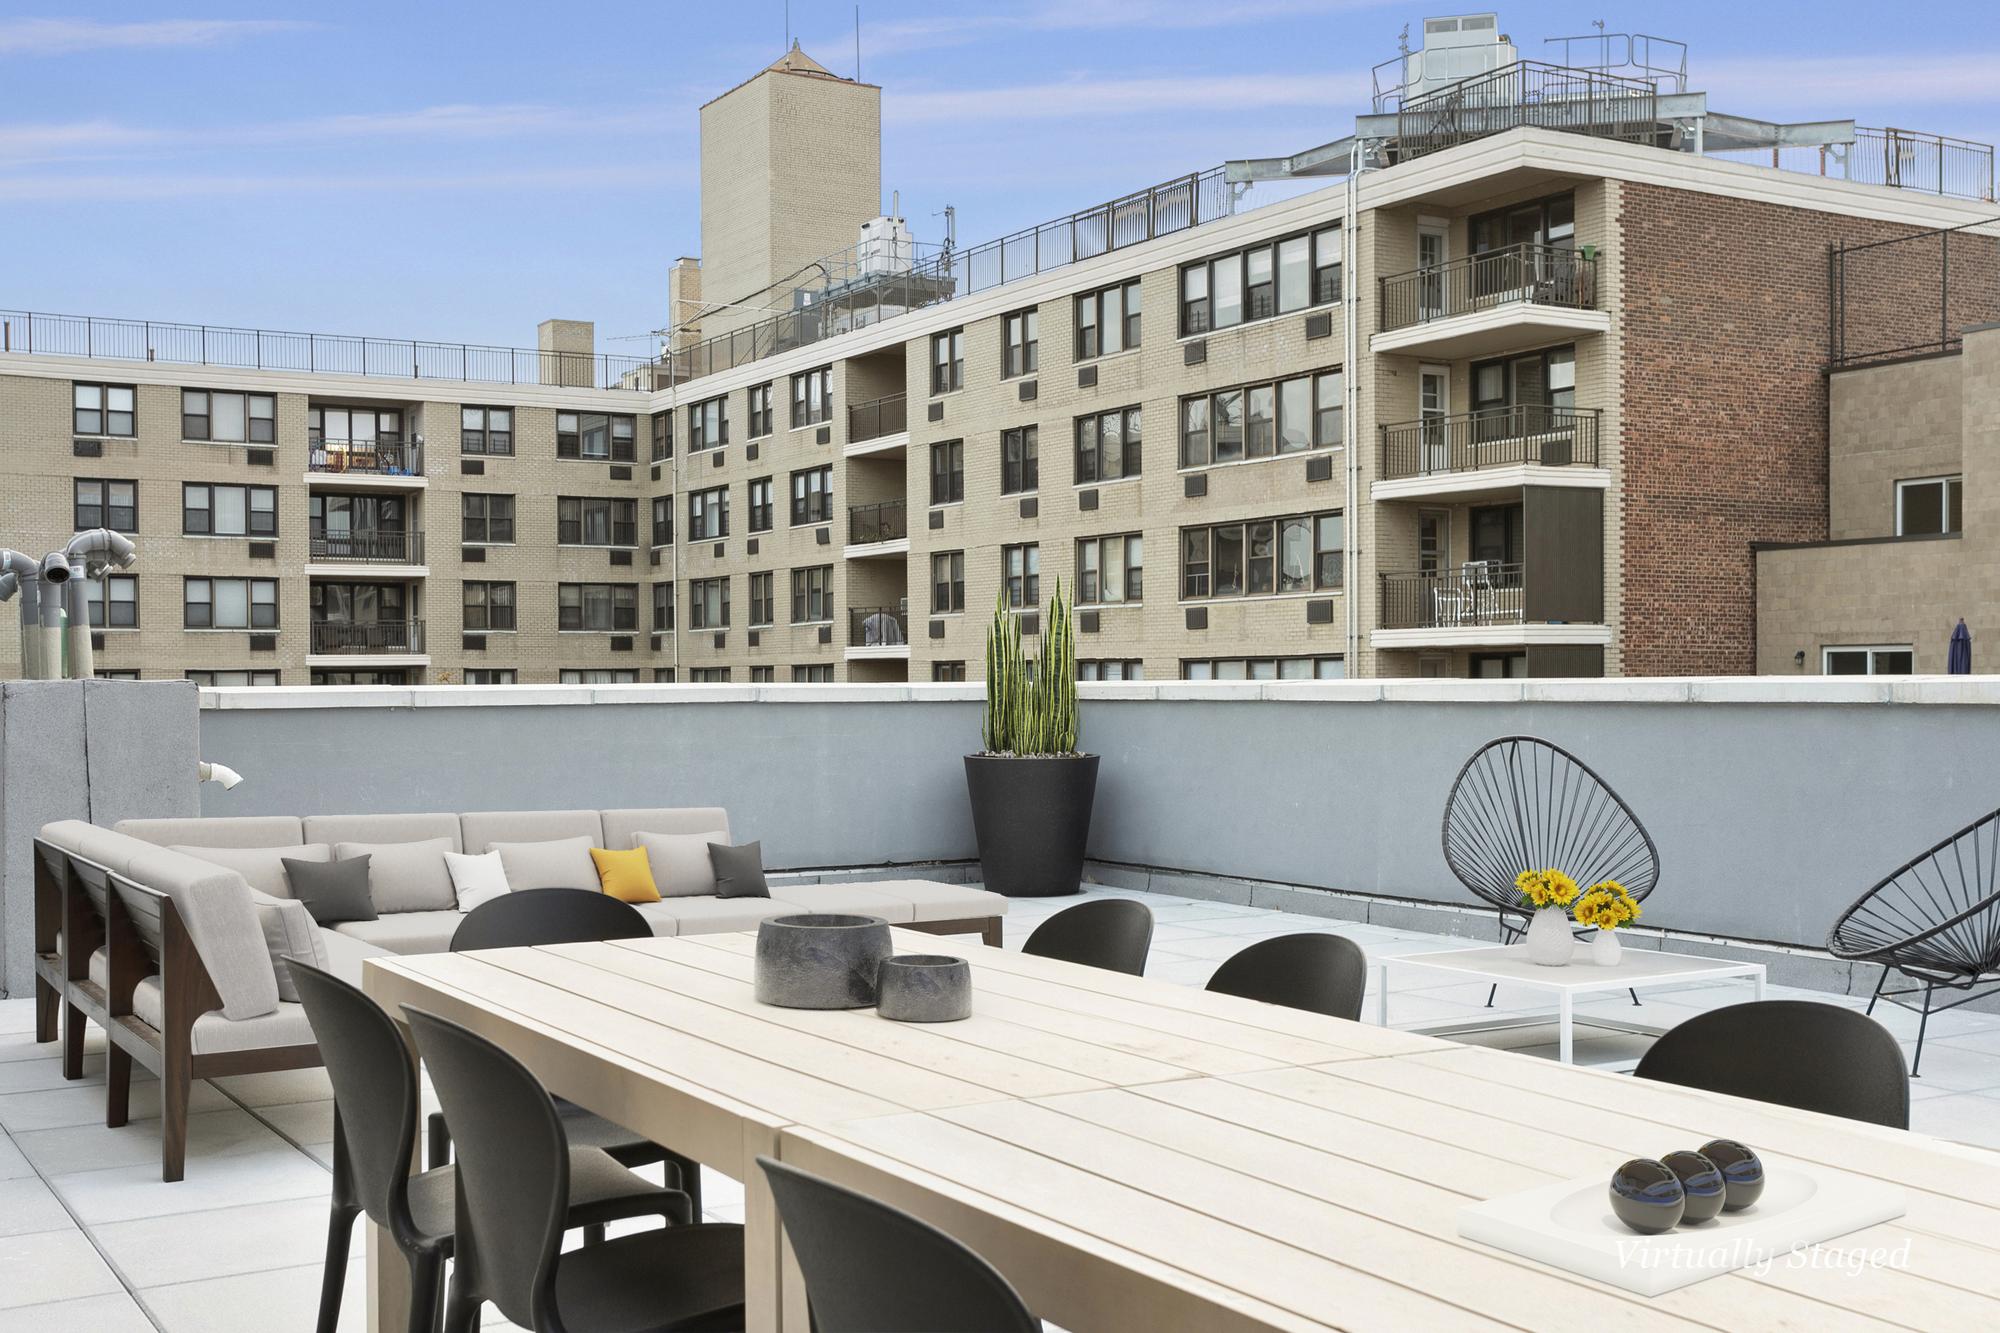 Roof Deck with Couch, Seating and Table and Community Table with Chairs